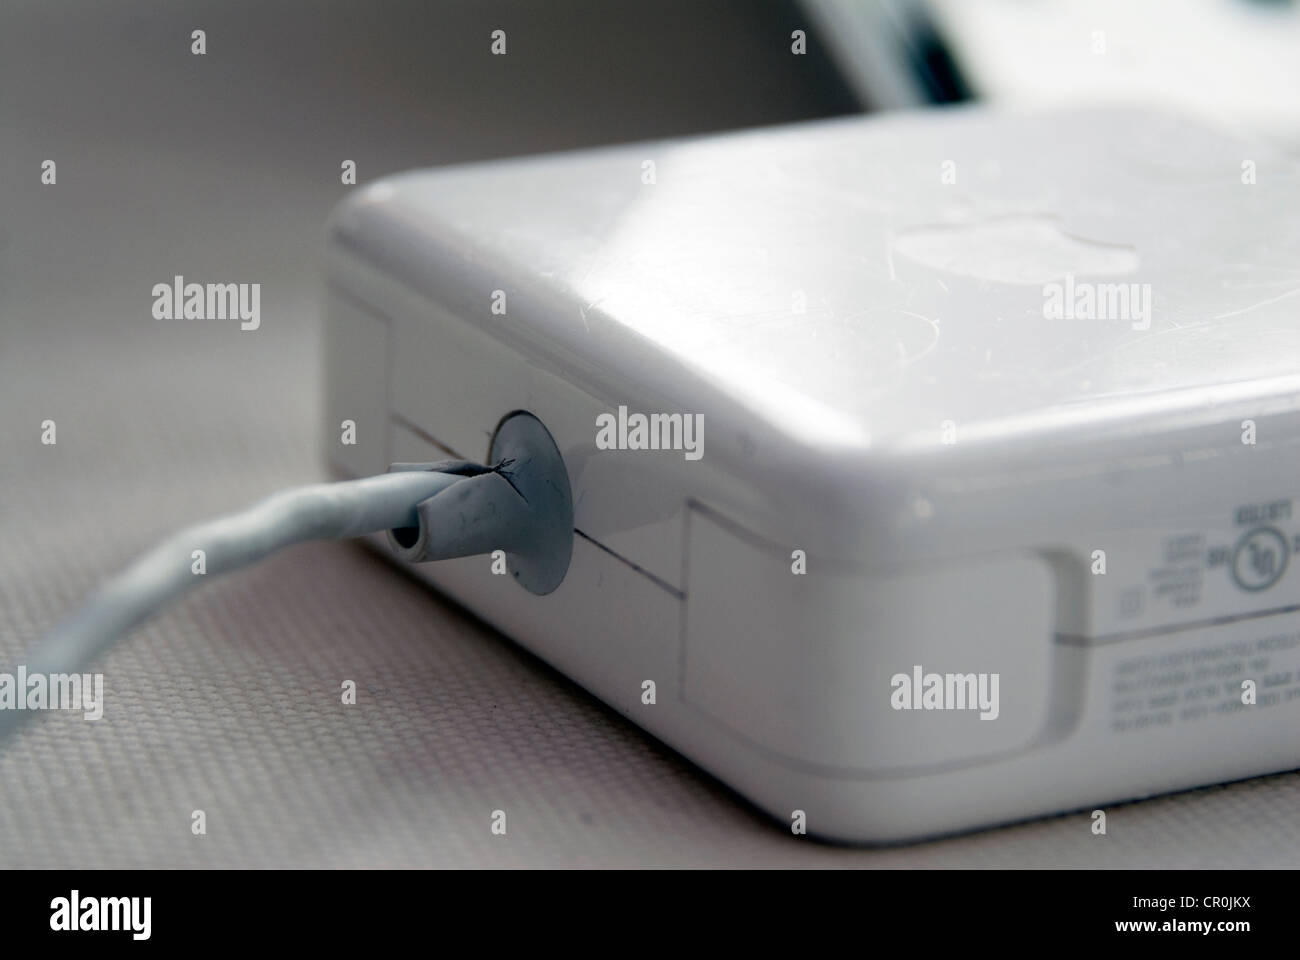 Apple MacBook Pro faulty T MagSafe power adapter MacBook fray frayed Mag Safe adapters cord cords separation between white insul Stock Photo